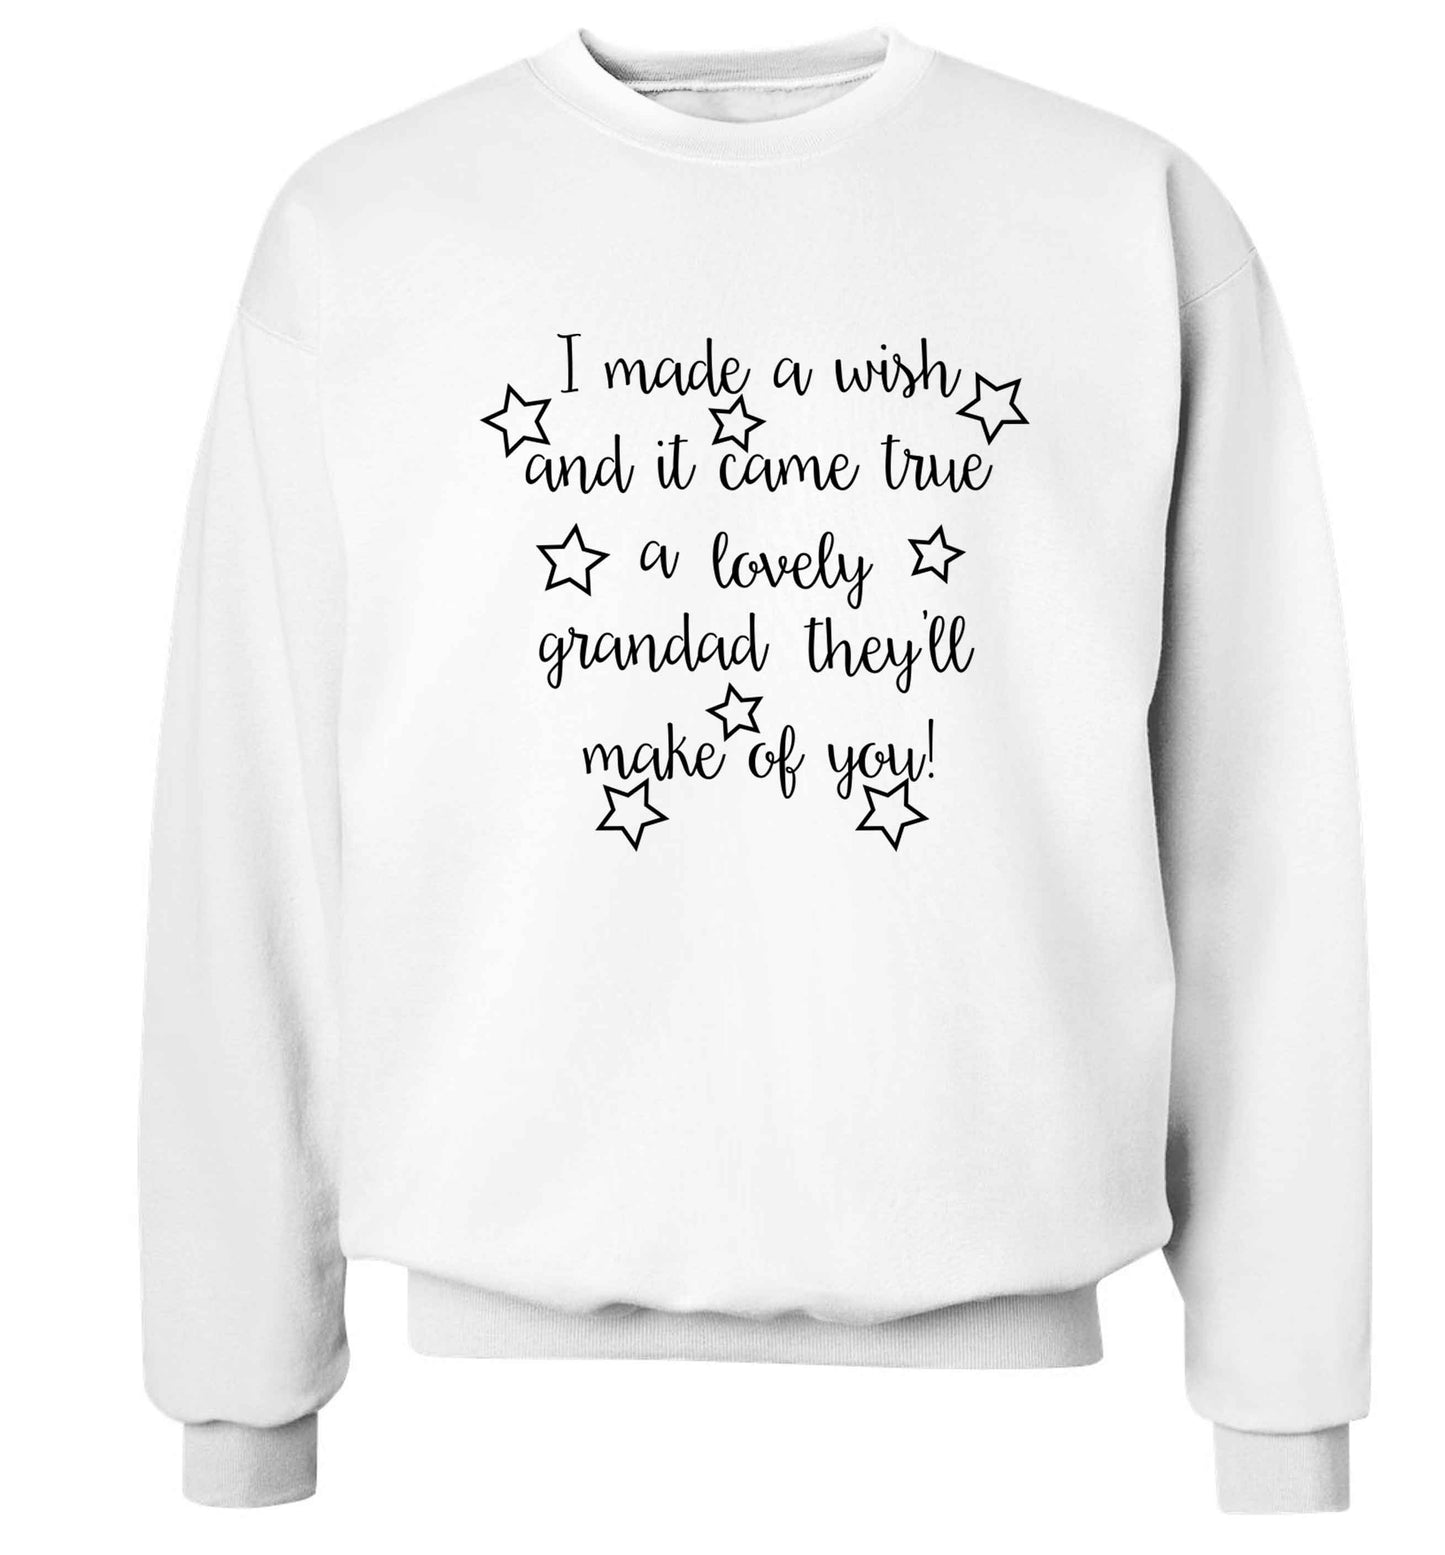 I made a wish and it came true a lovely grandad they'll make of you! Adult's unisex white Sweater 2XL